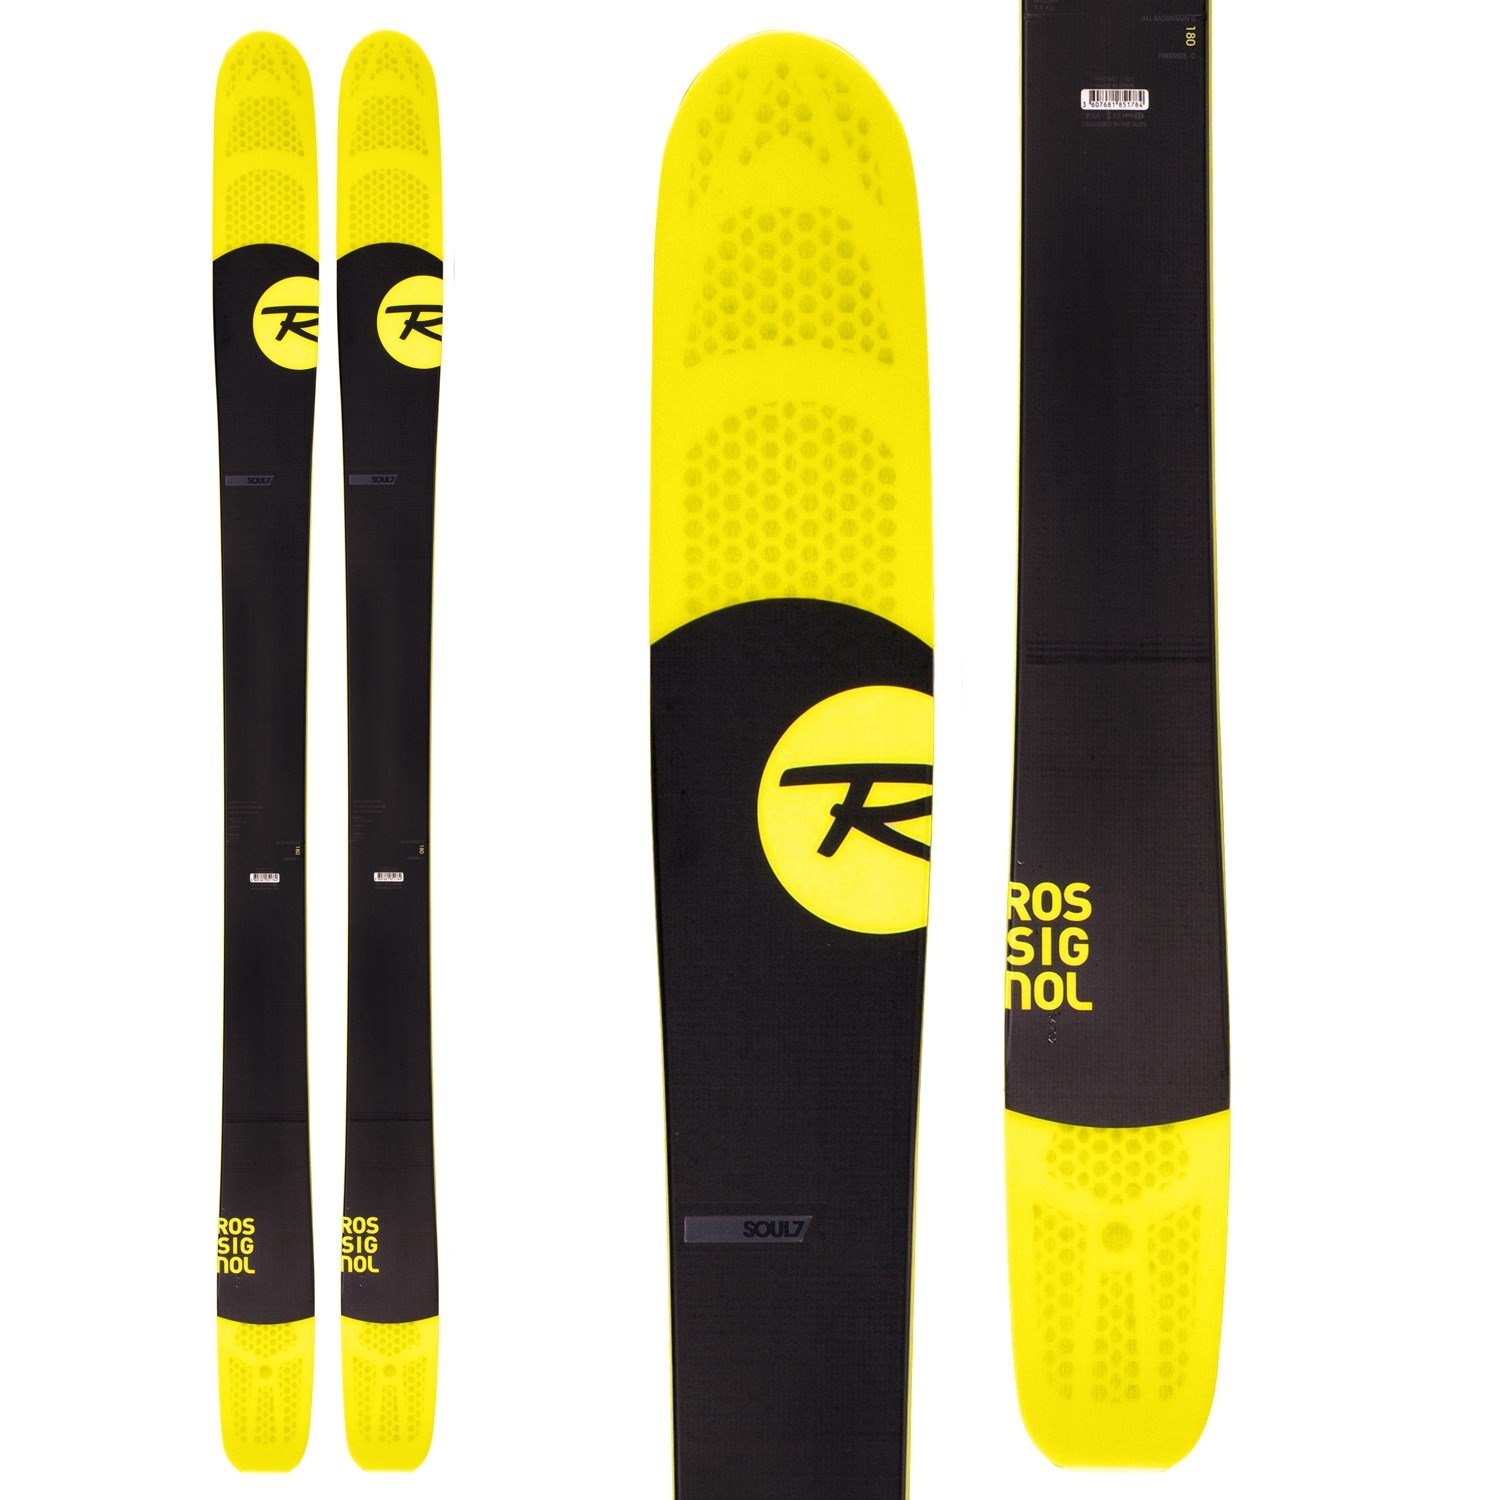 limited quantities! Includes system binding 2020 Rossignol Soul 7 Konect 